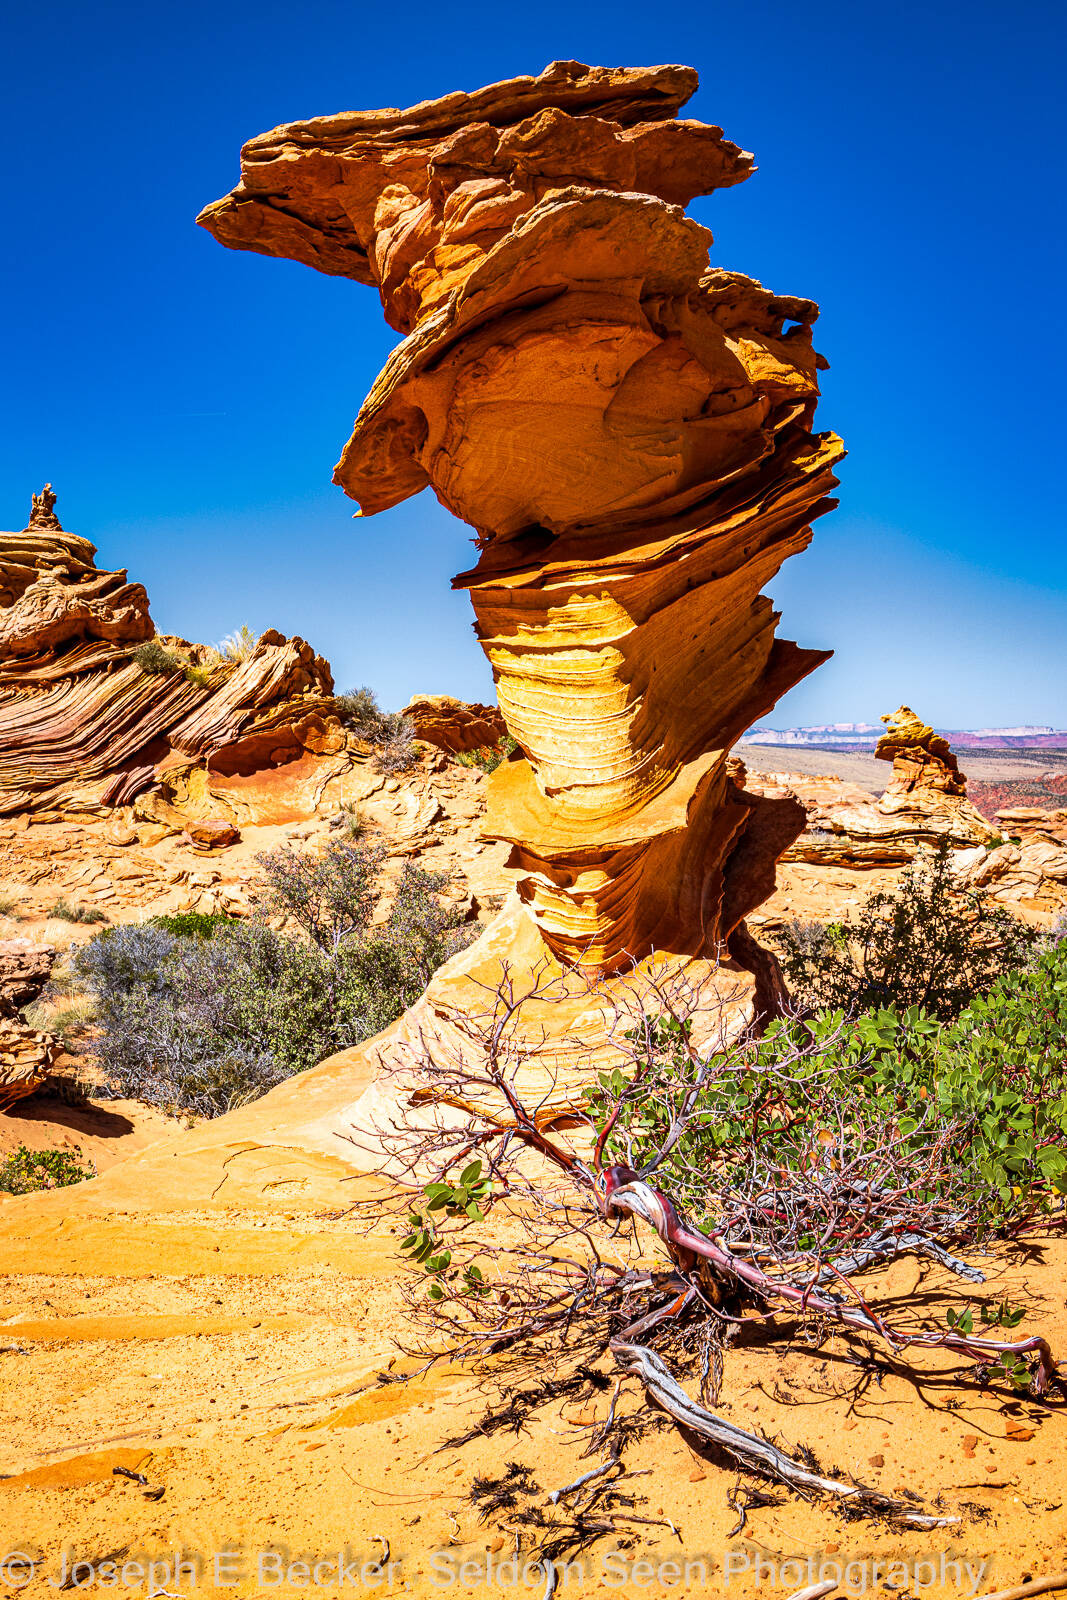 Image of South Coyote Buttes - Control Tower by Joe Becker